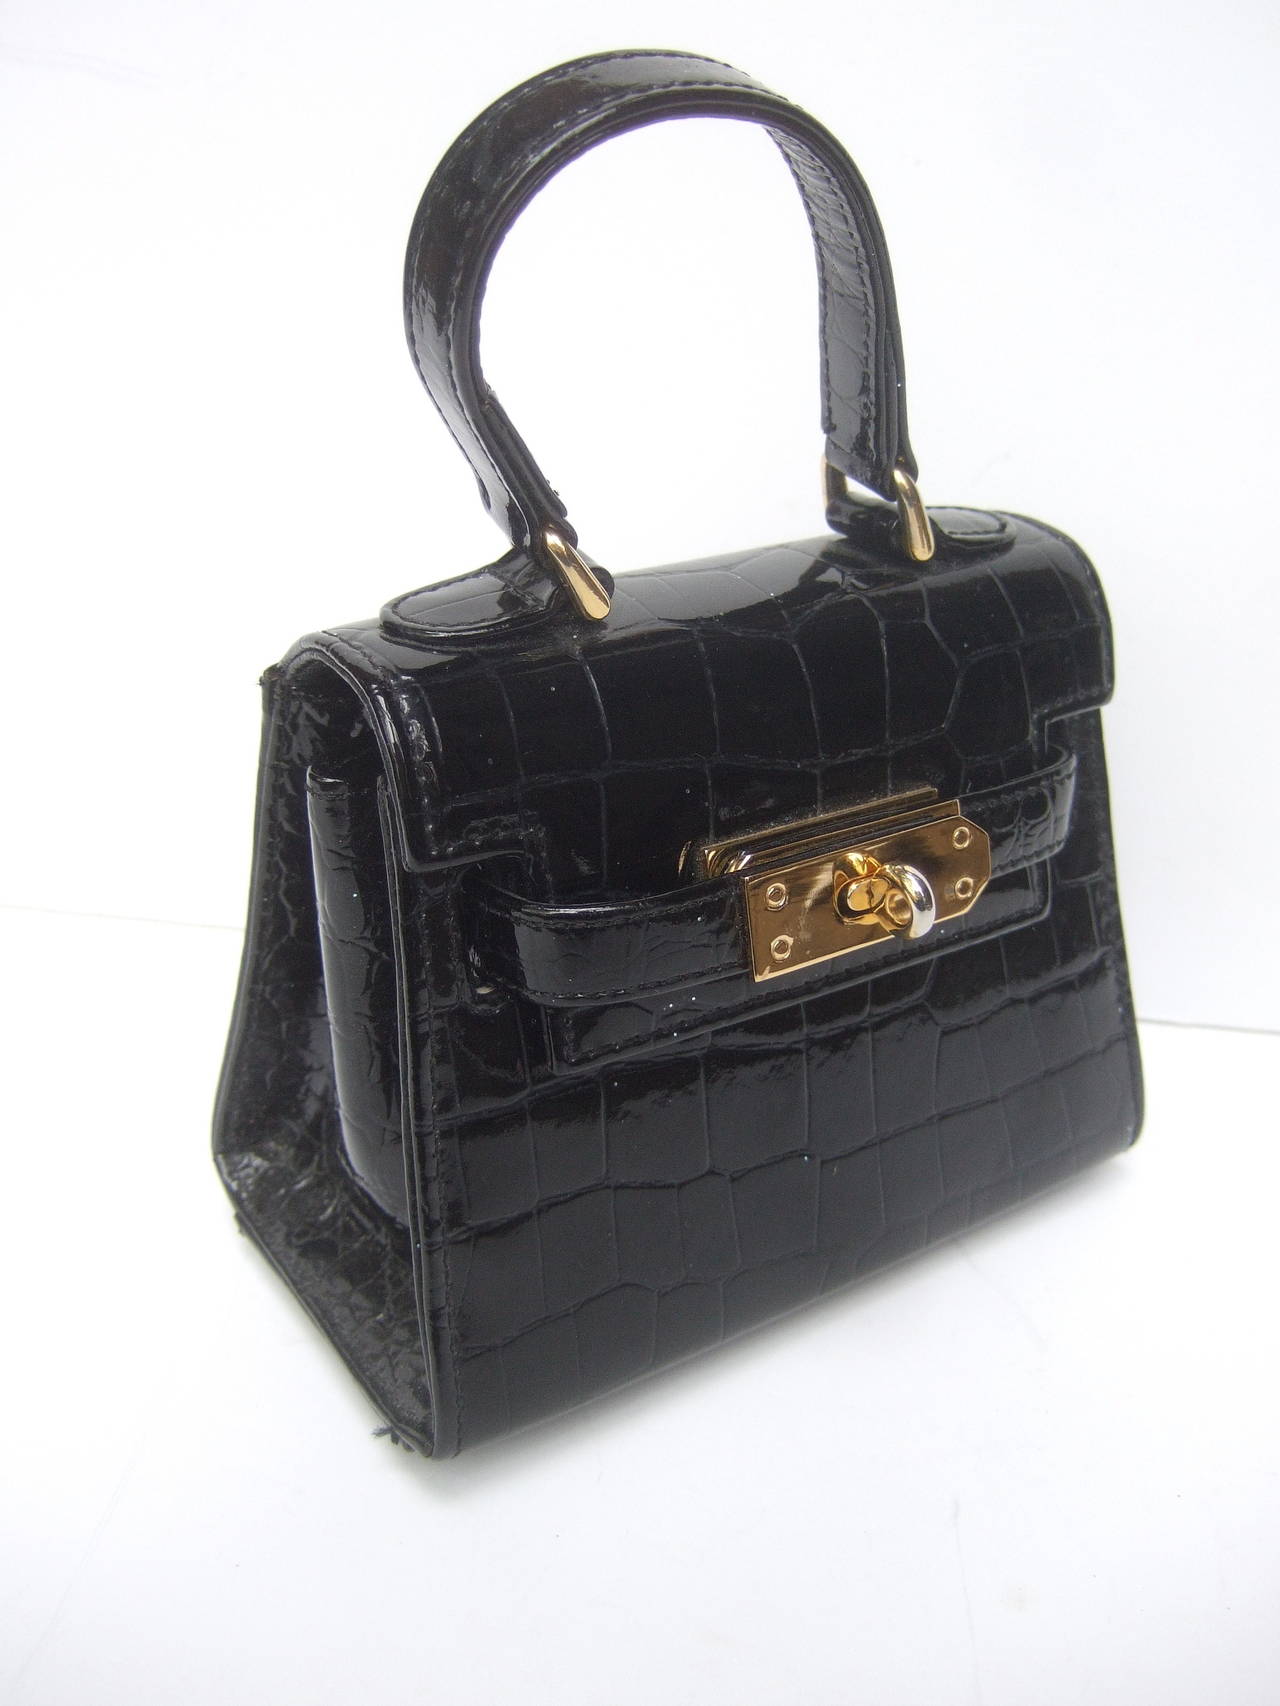 Diminutive black embossed leather handbag Made in Italy 
The sleek compact size patent leather handbag is covered
with glossy stamped leather that emulates reptile skin

The stylish diminutive handbag is embellished with gilt metal
hardware.